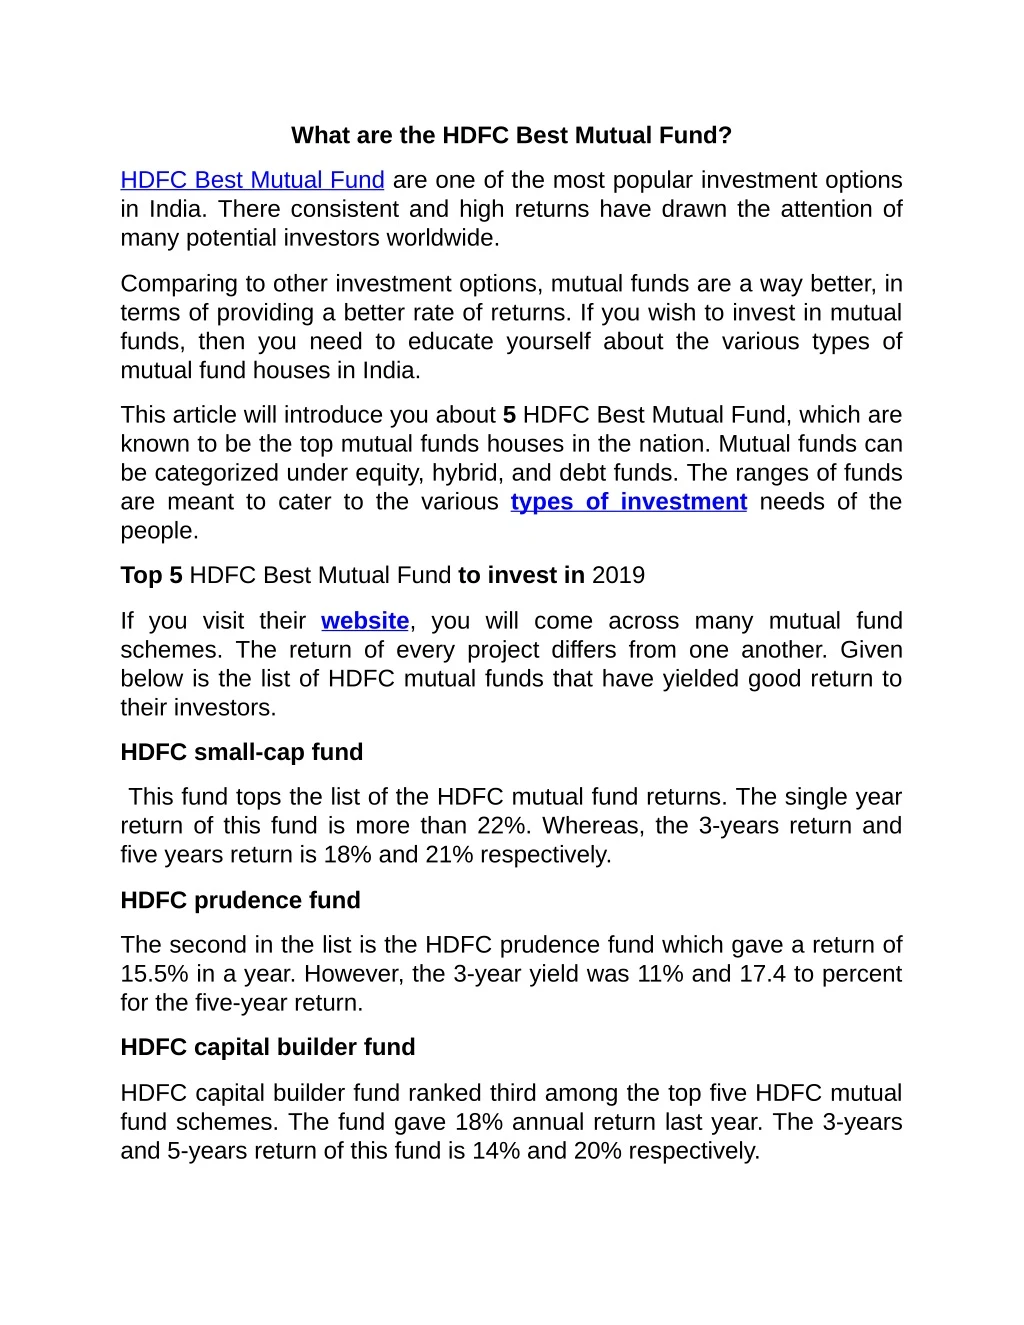 what are the hdfc best mutual fund